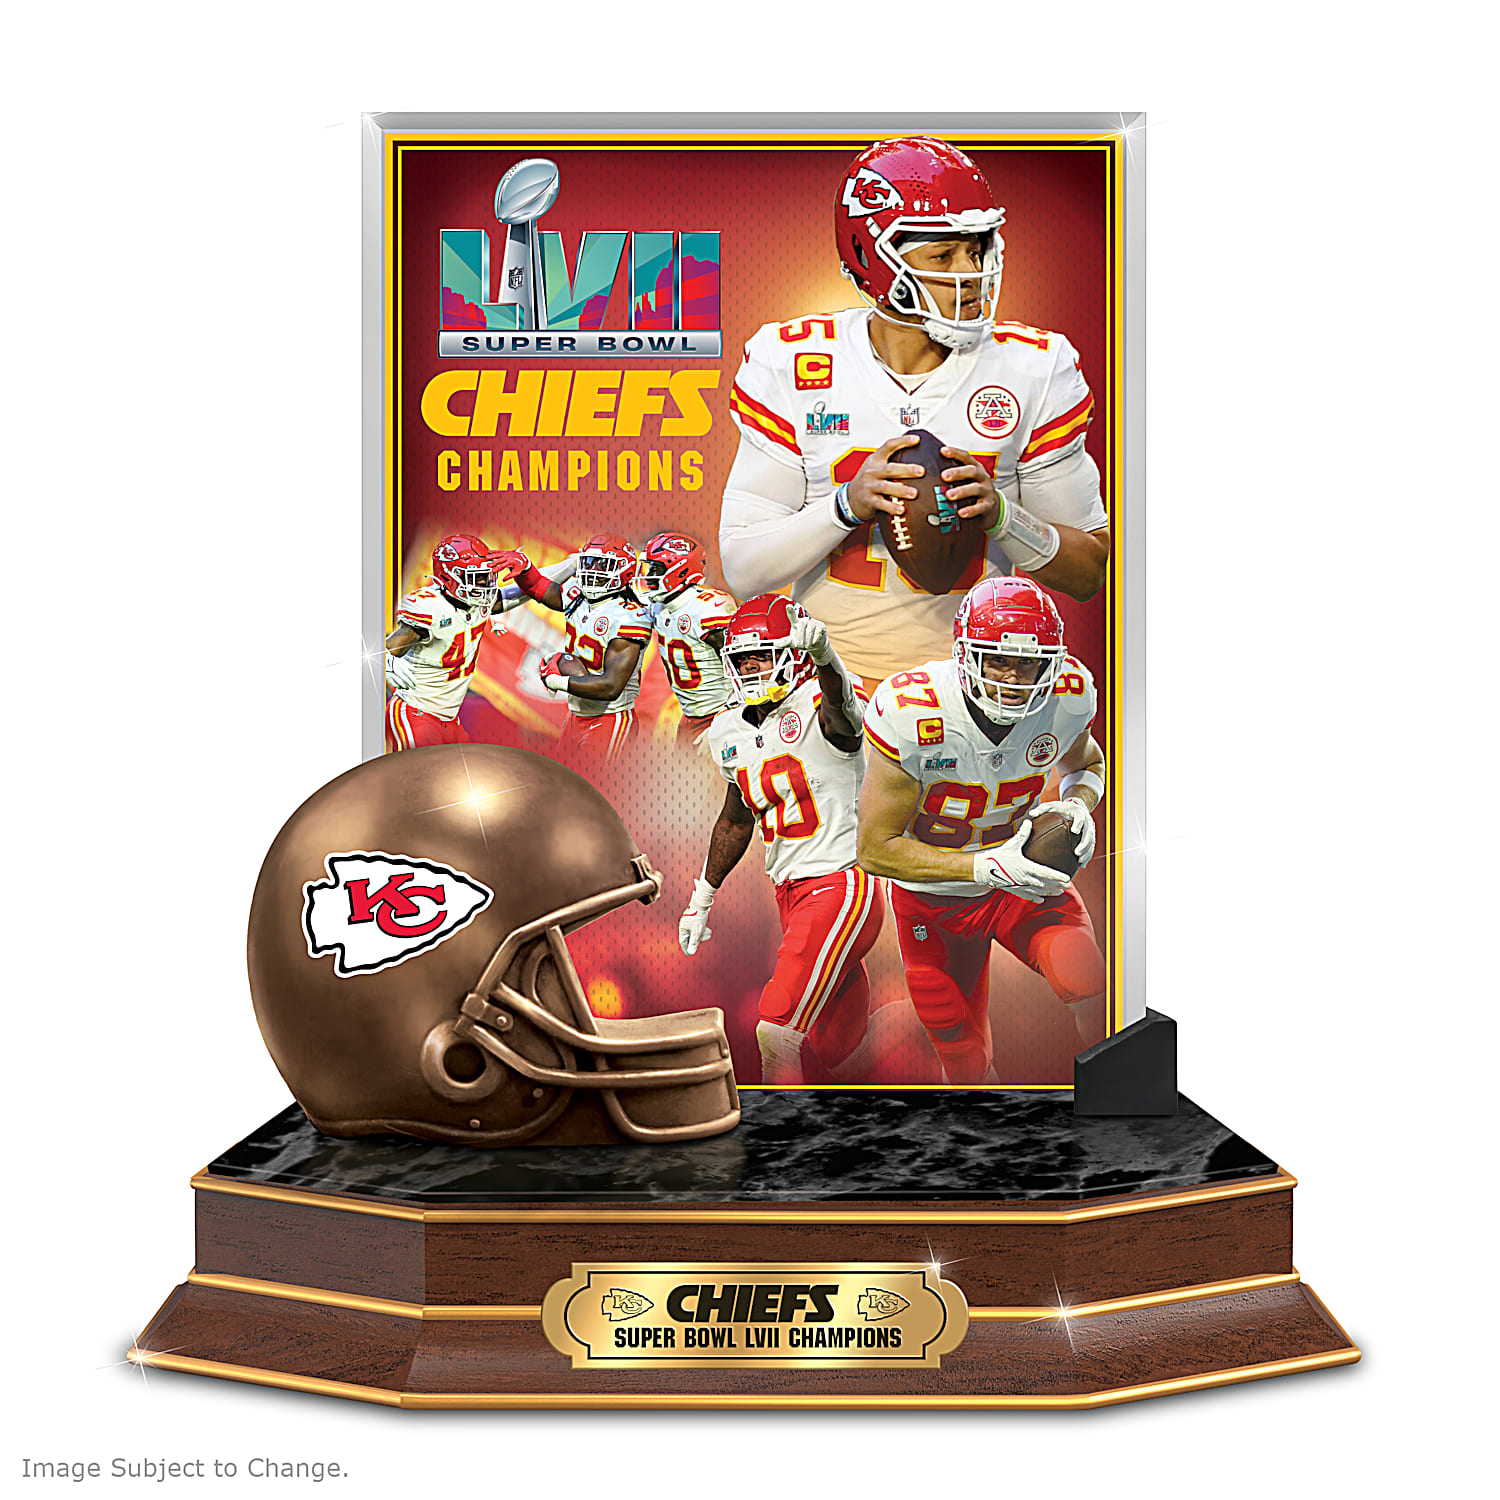 Kansas City Chiefs Super Bowl LVII Football Limited Edition Exclusive